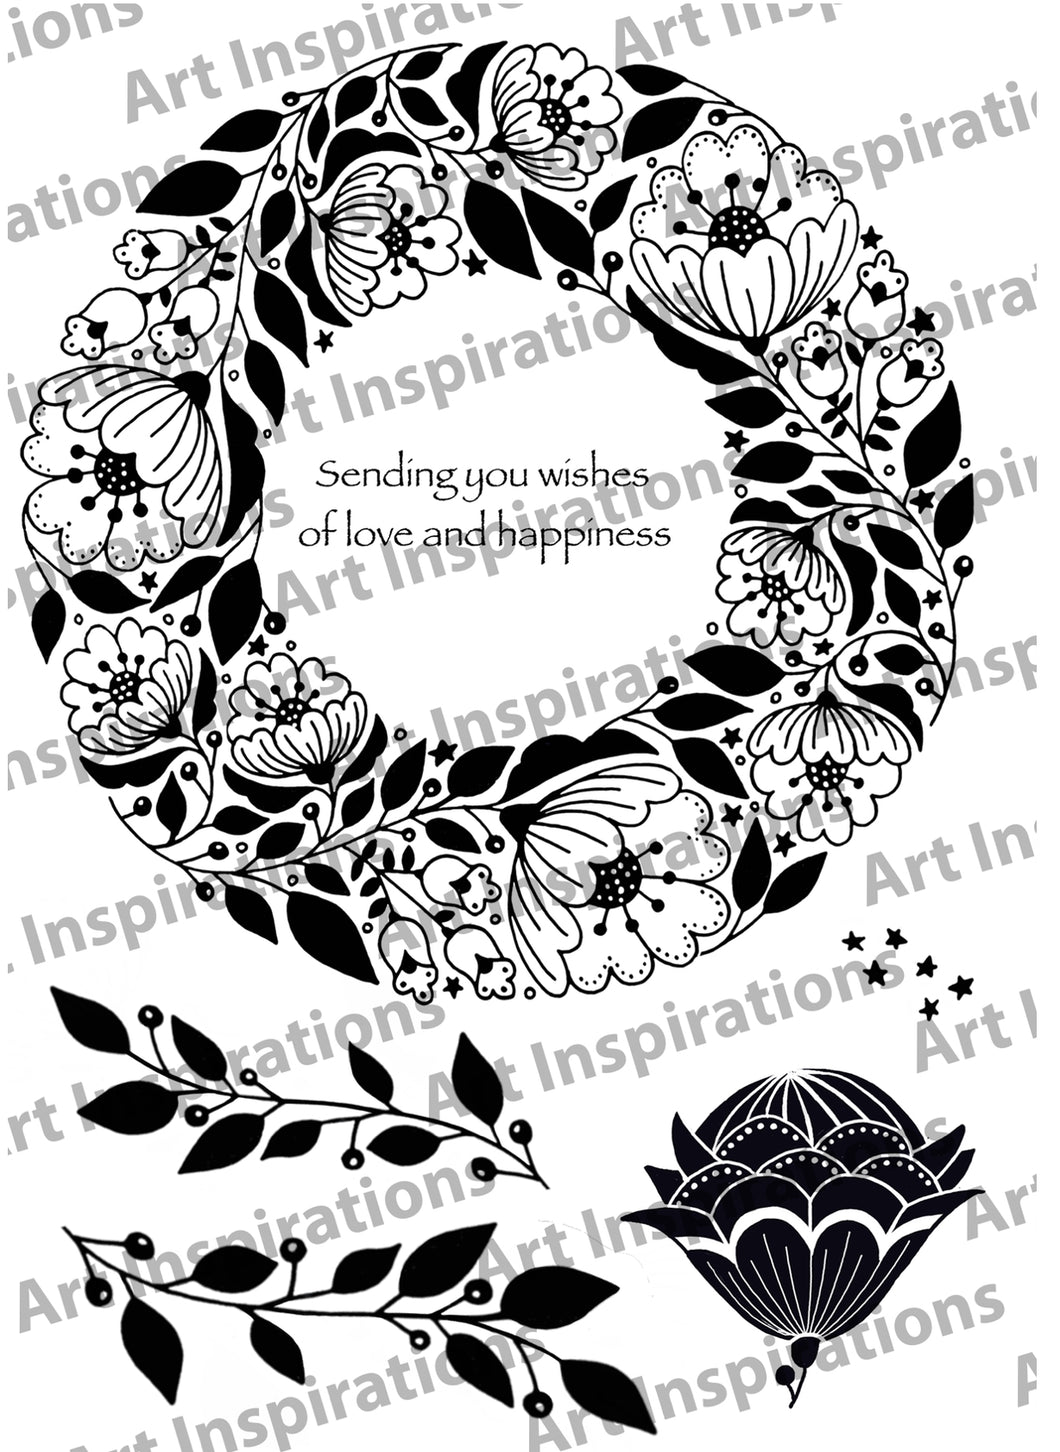 Art Inspirations by Wensdi Made A5 Clear Stamp Sheet - Floral Wishes - 6 Stamps